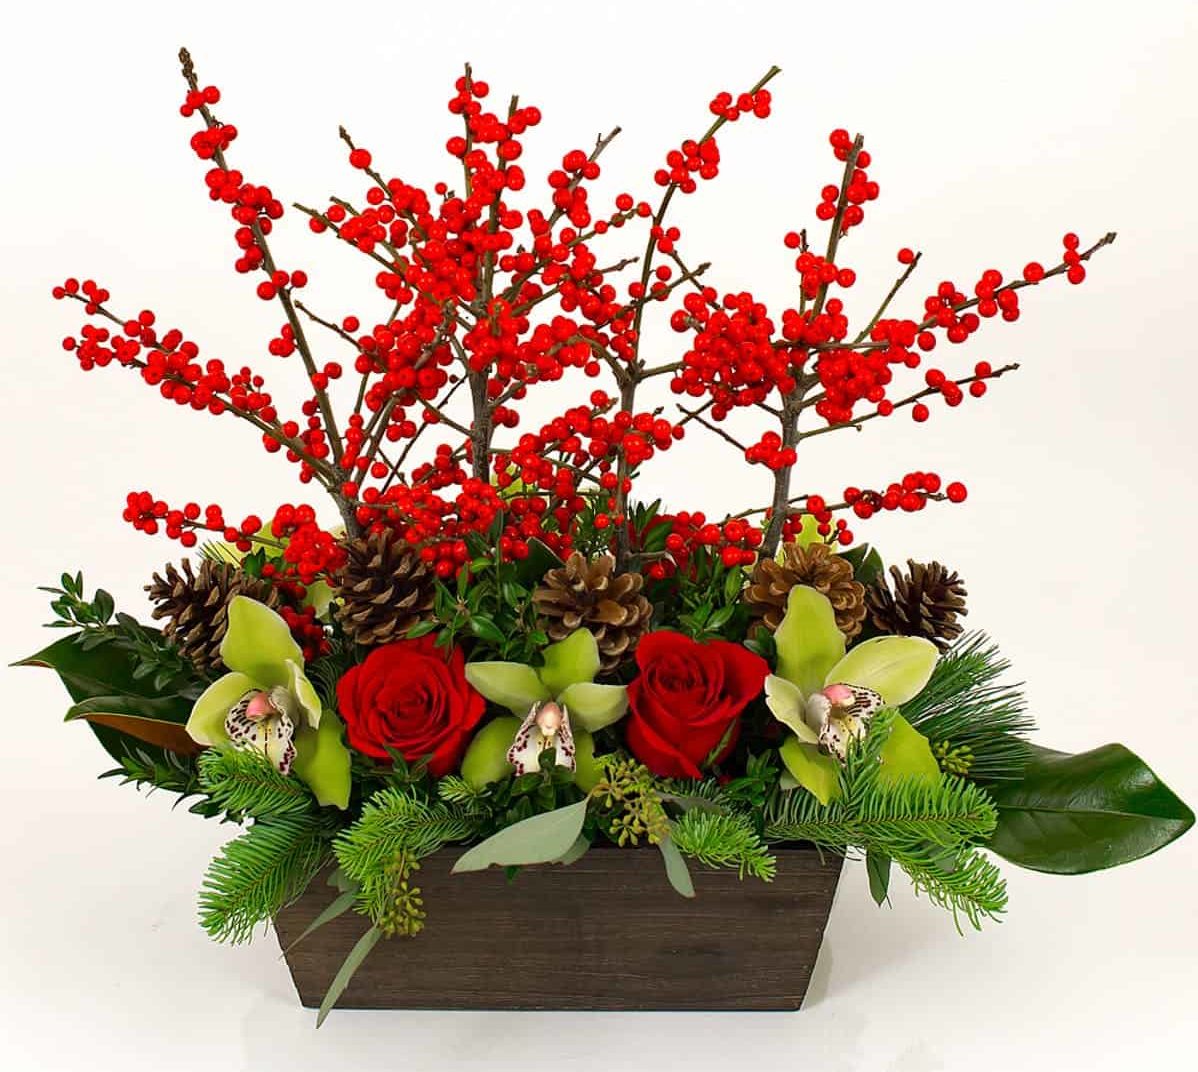 Rustic Winter Centerpiece combines the rustic feel of berries and a wooden container with more contemporary choices like cymbidium orchids and orchids.